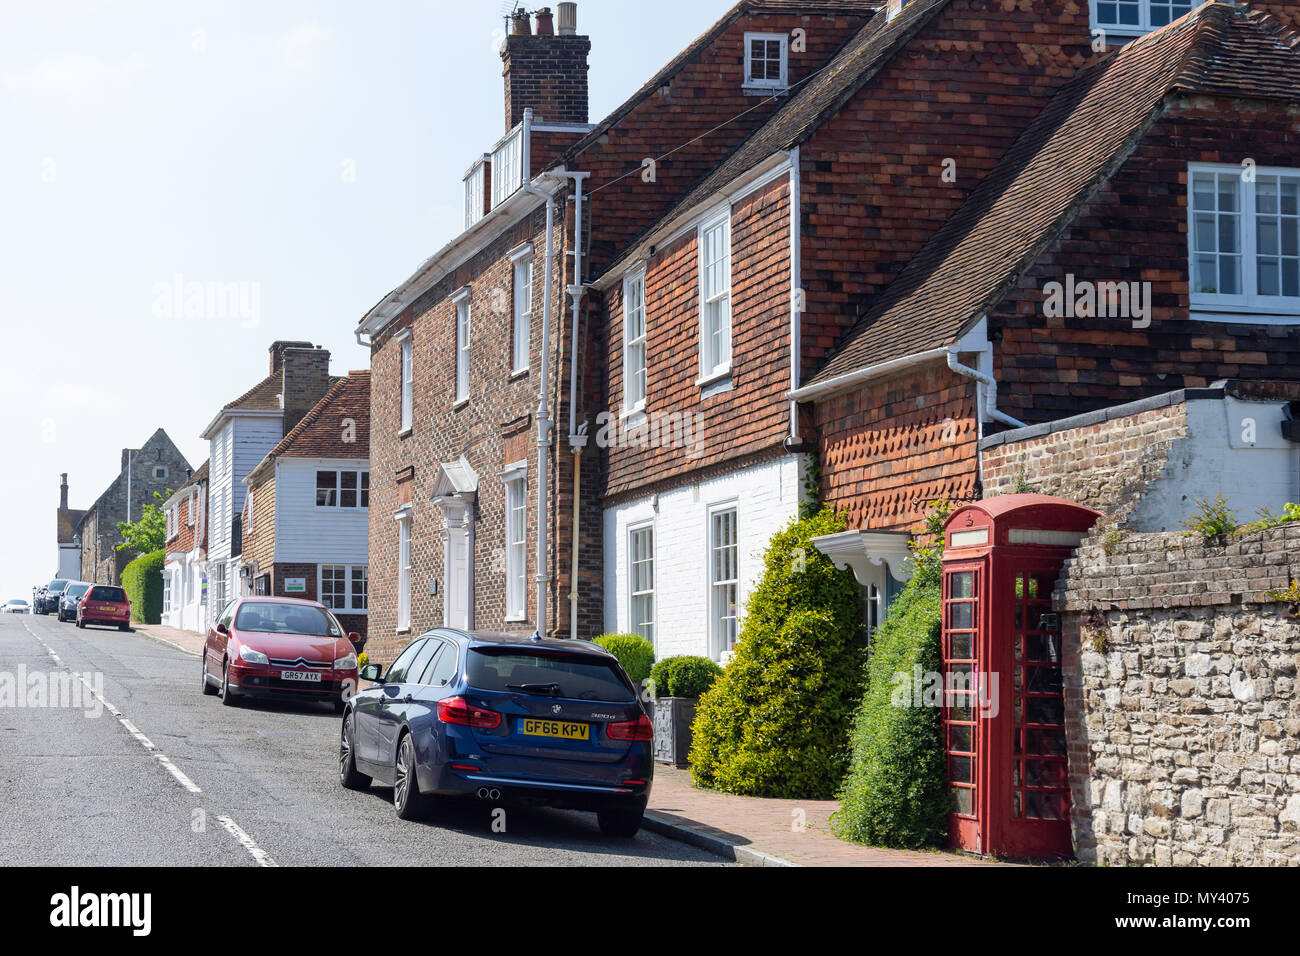 High Street, Winchelsea, East Sussex, England, Regno Unito Foto Stock